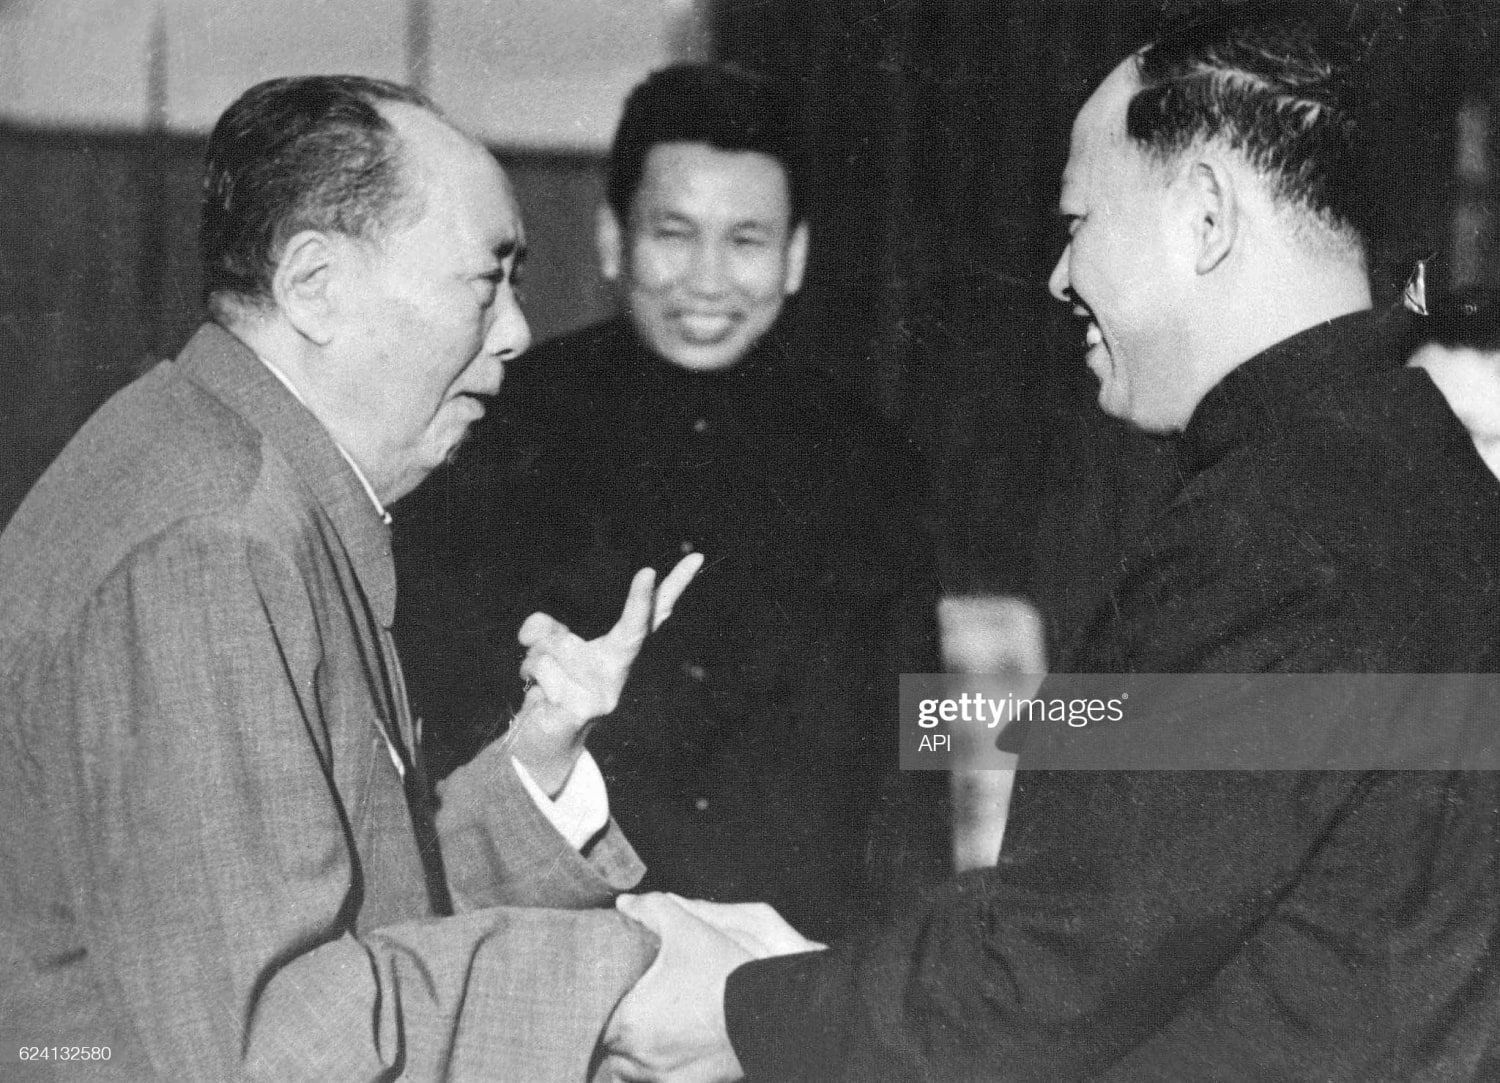 Mao Zedong with Khmer Rouge leaders Pol Pot (middle) and Ieng Sary in June 1975 in Beijing, China